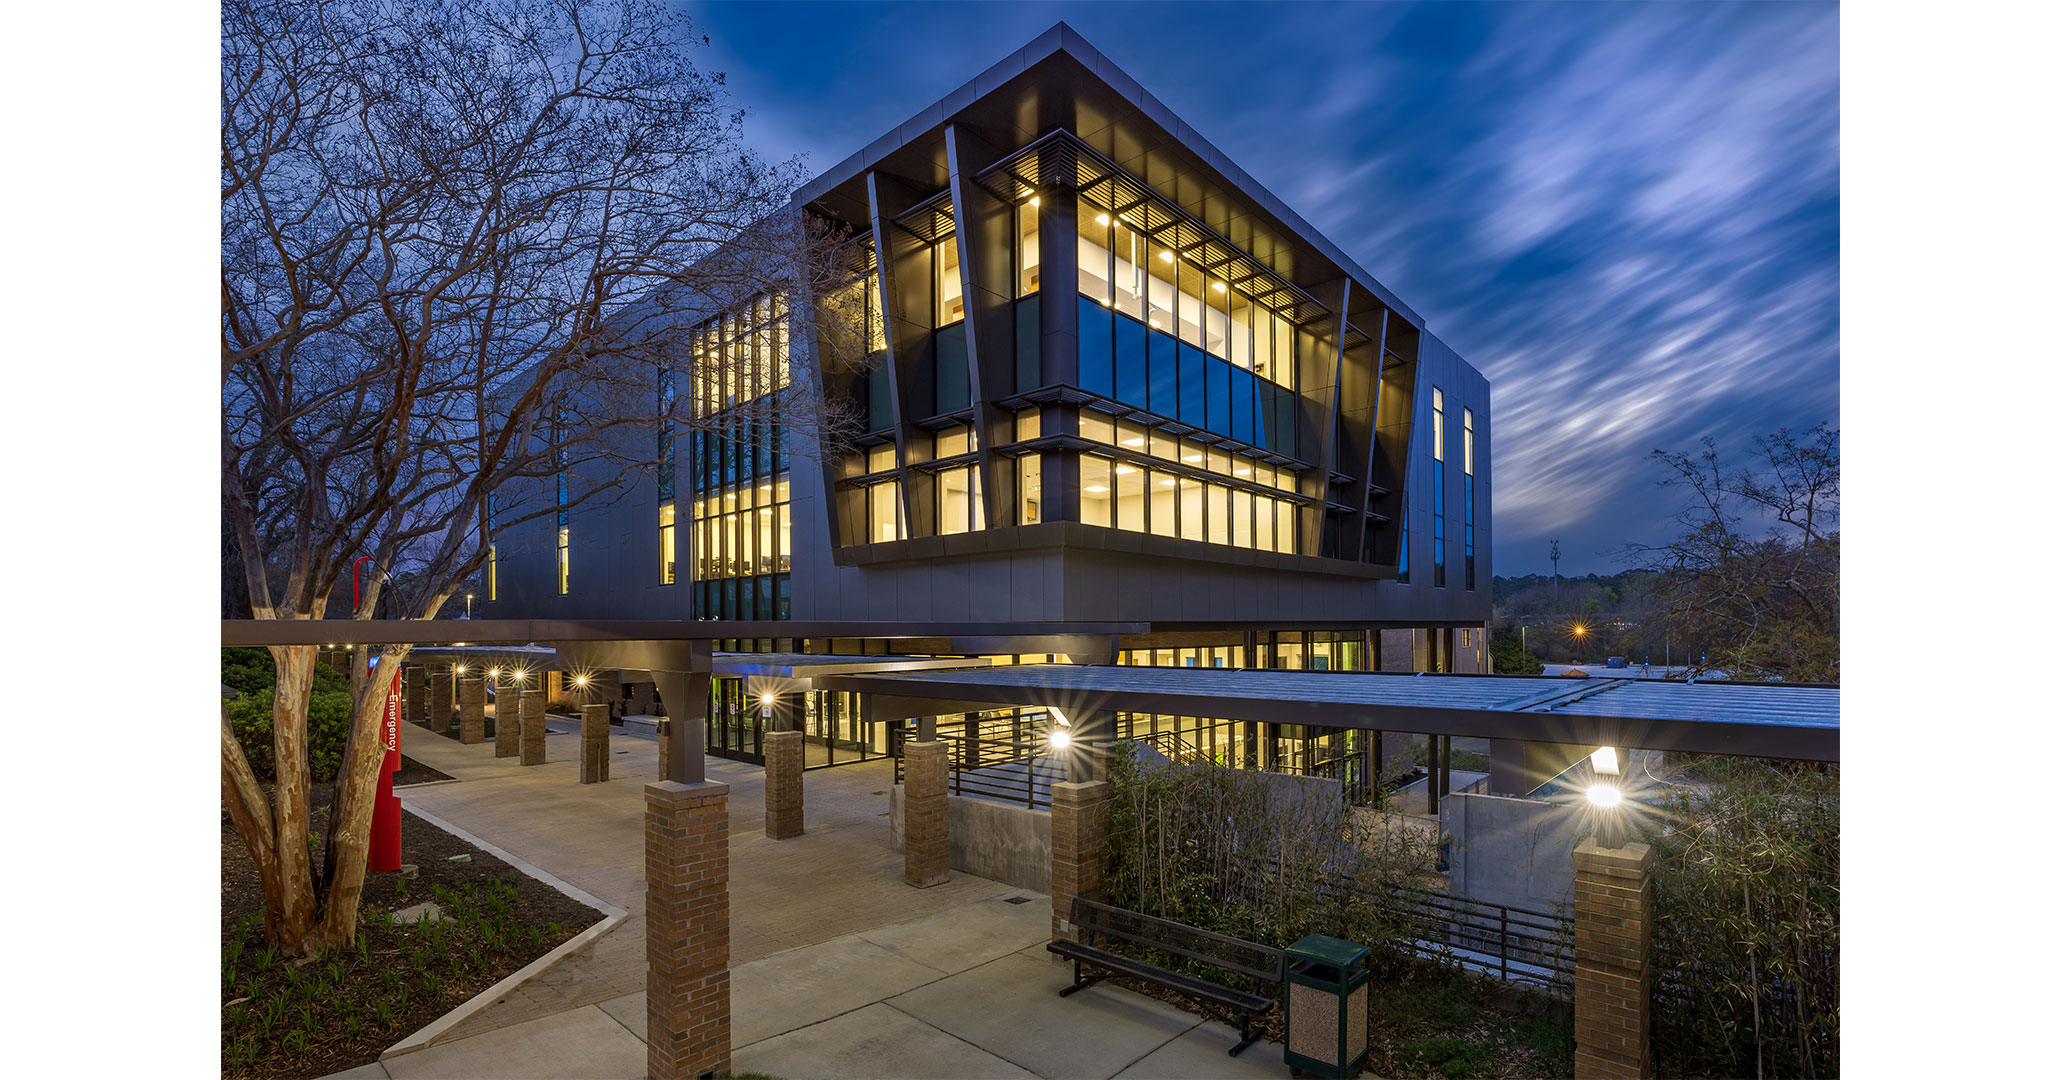 BOUDREAUX architects designed Midlands Technical College’s new Center for Business and Information Technologies